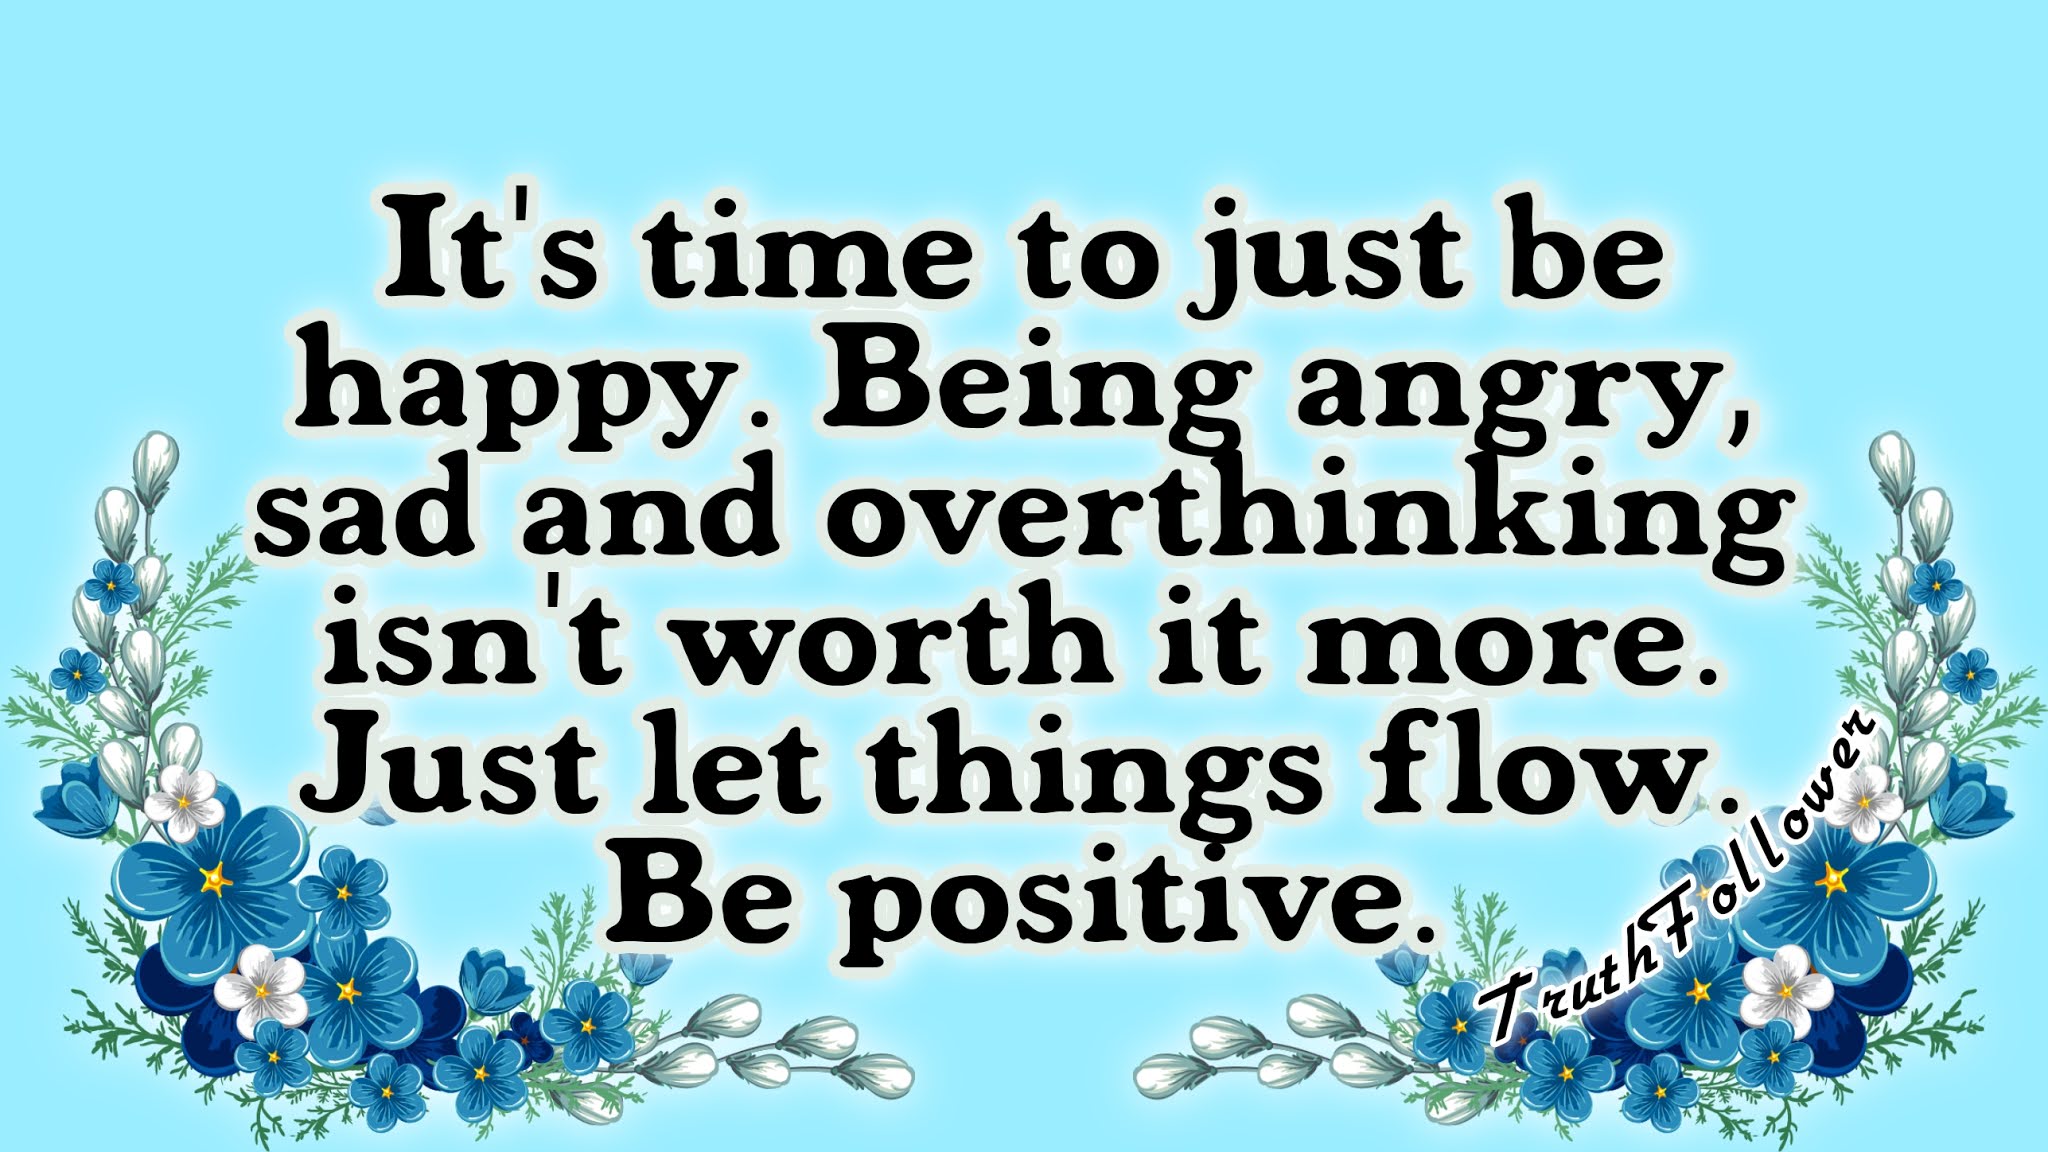 Be positive and let things flow